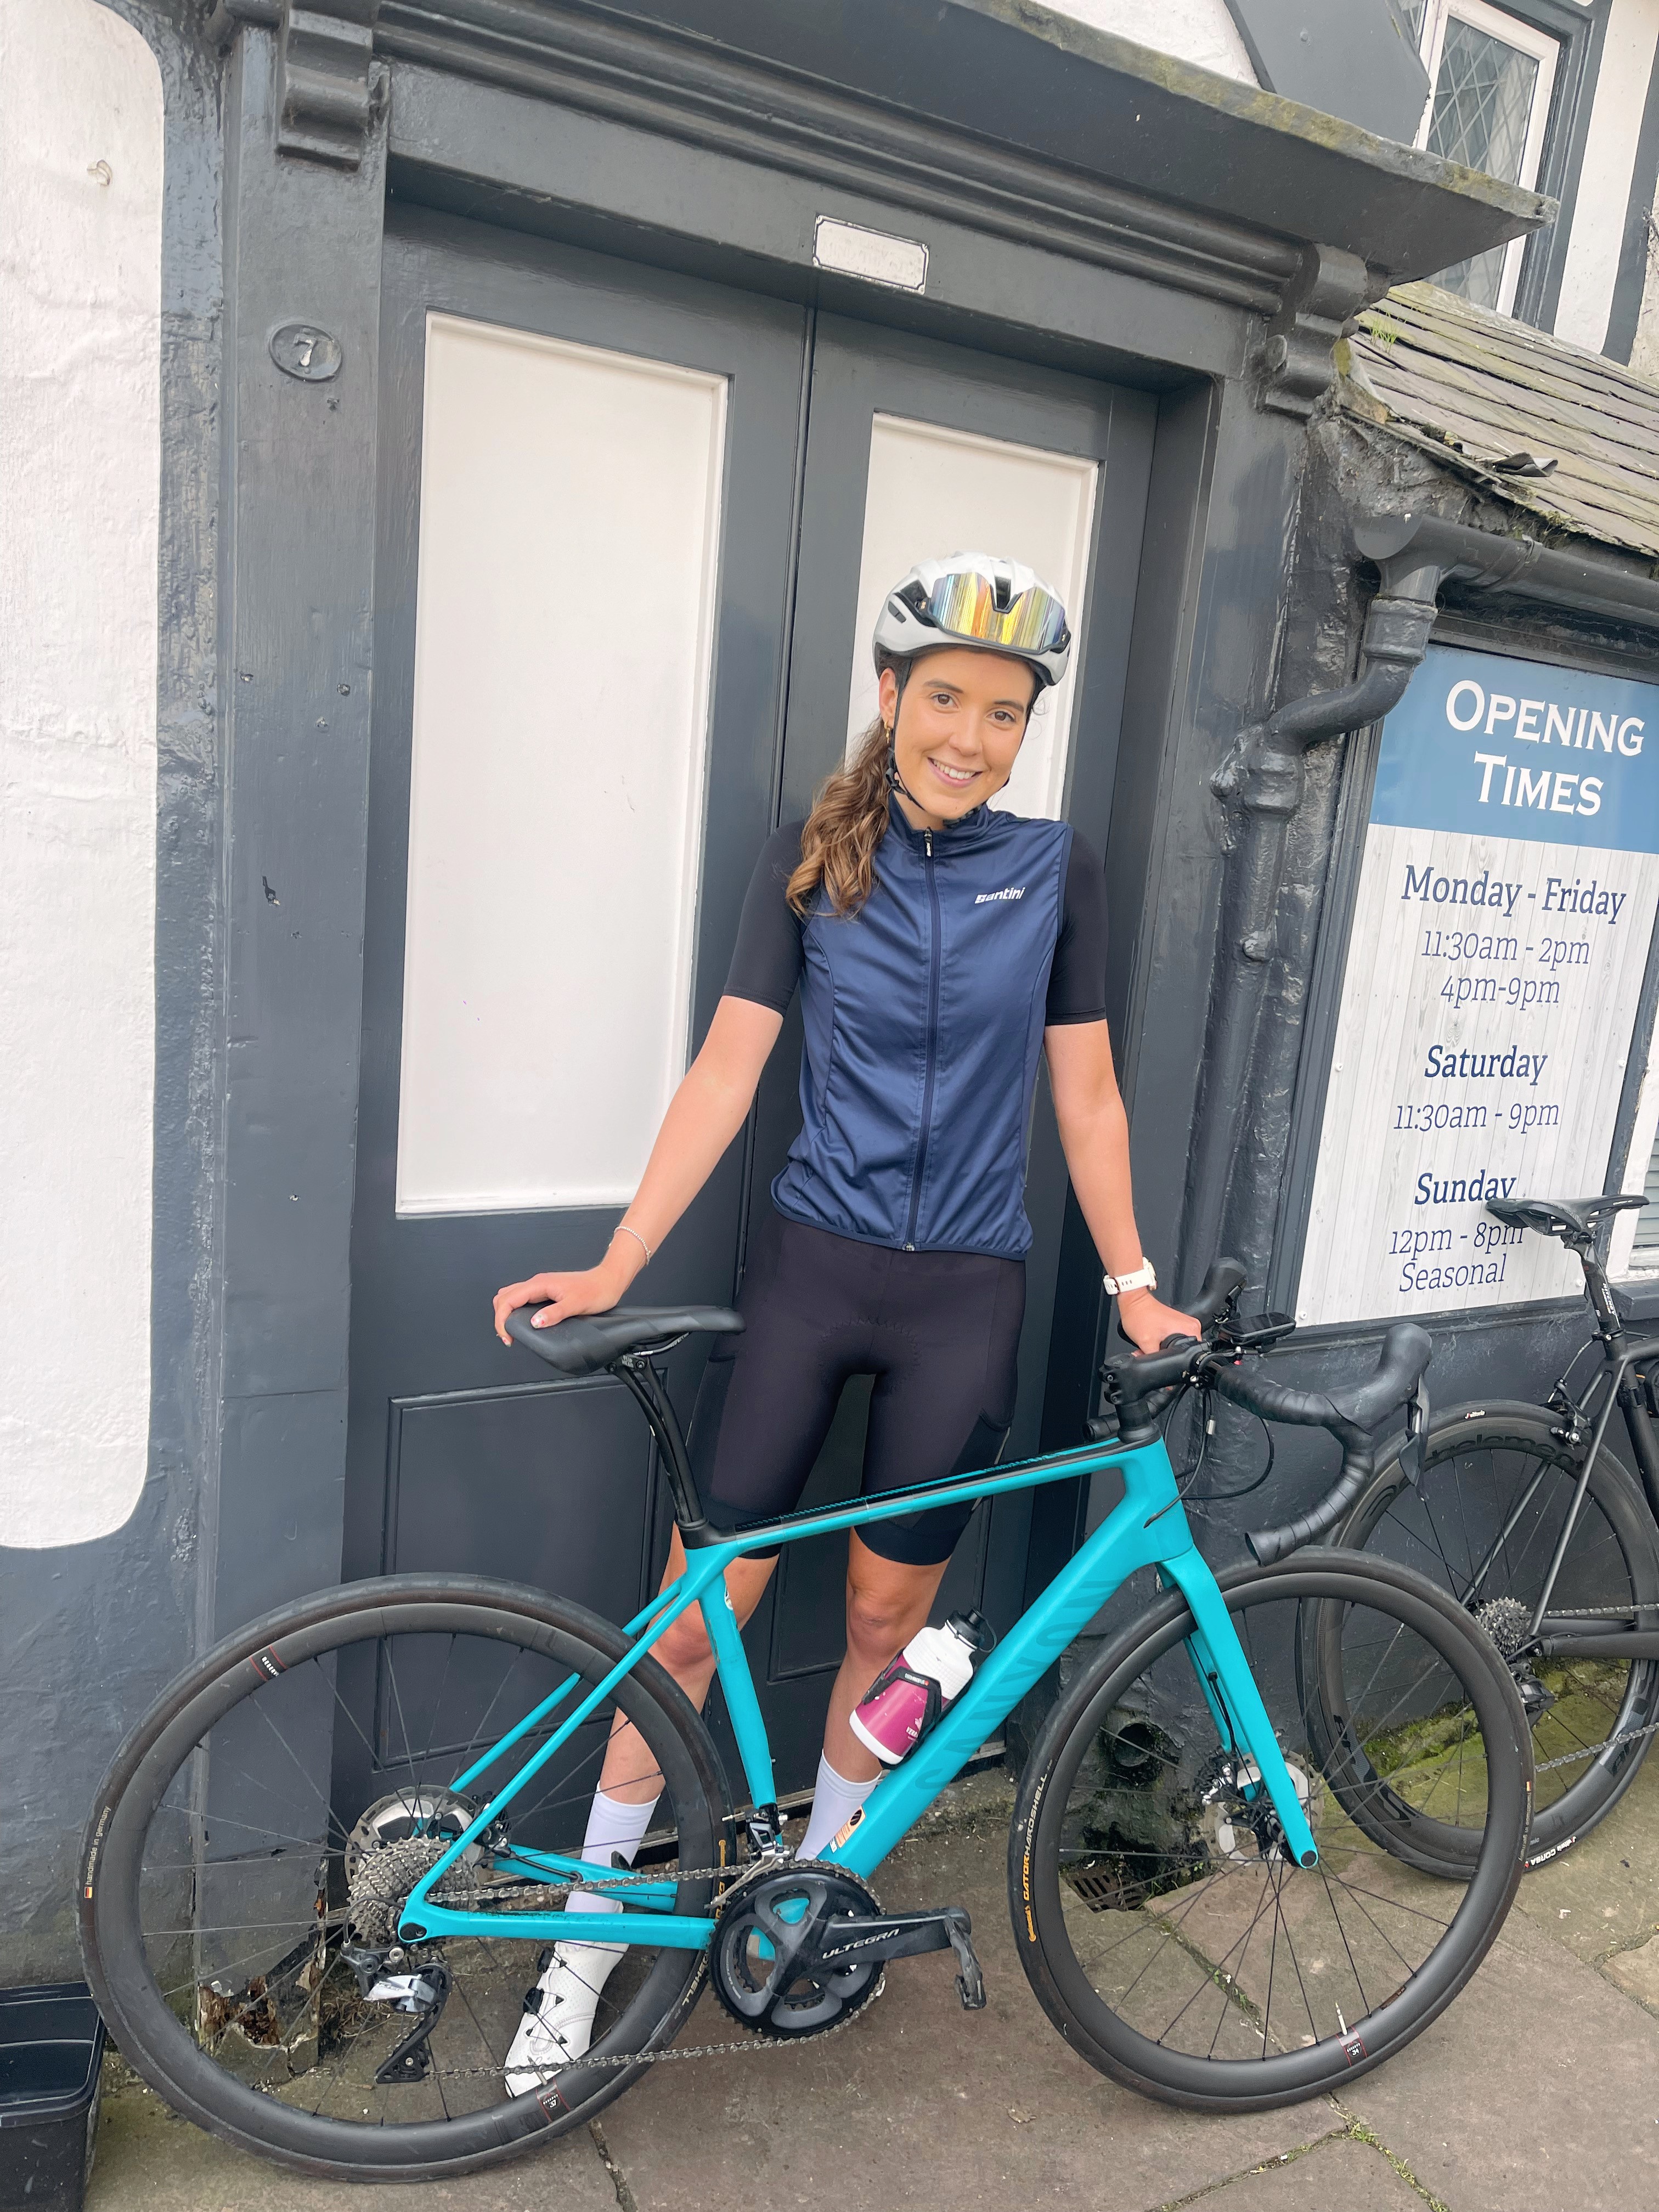 Derbyshire Healthcare colleague to cycle over 1000km in a week to fundraise for mental health